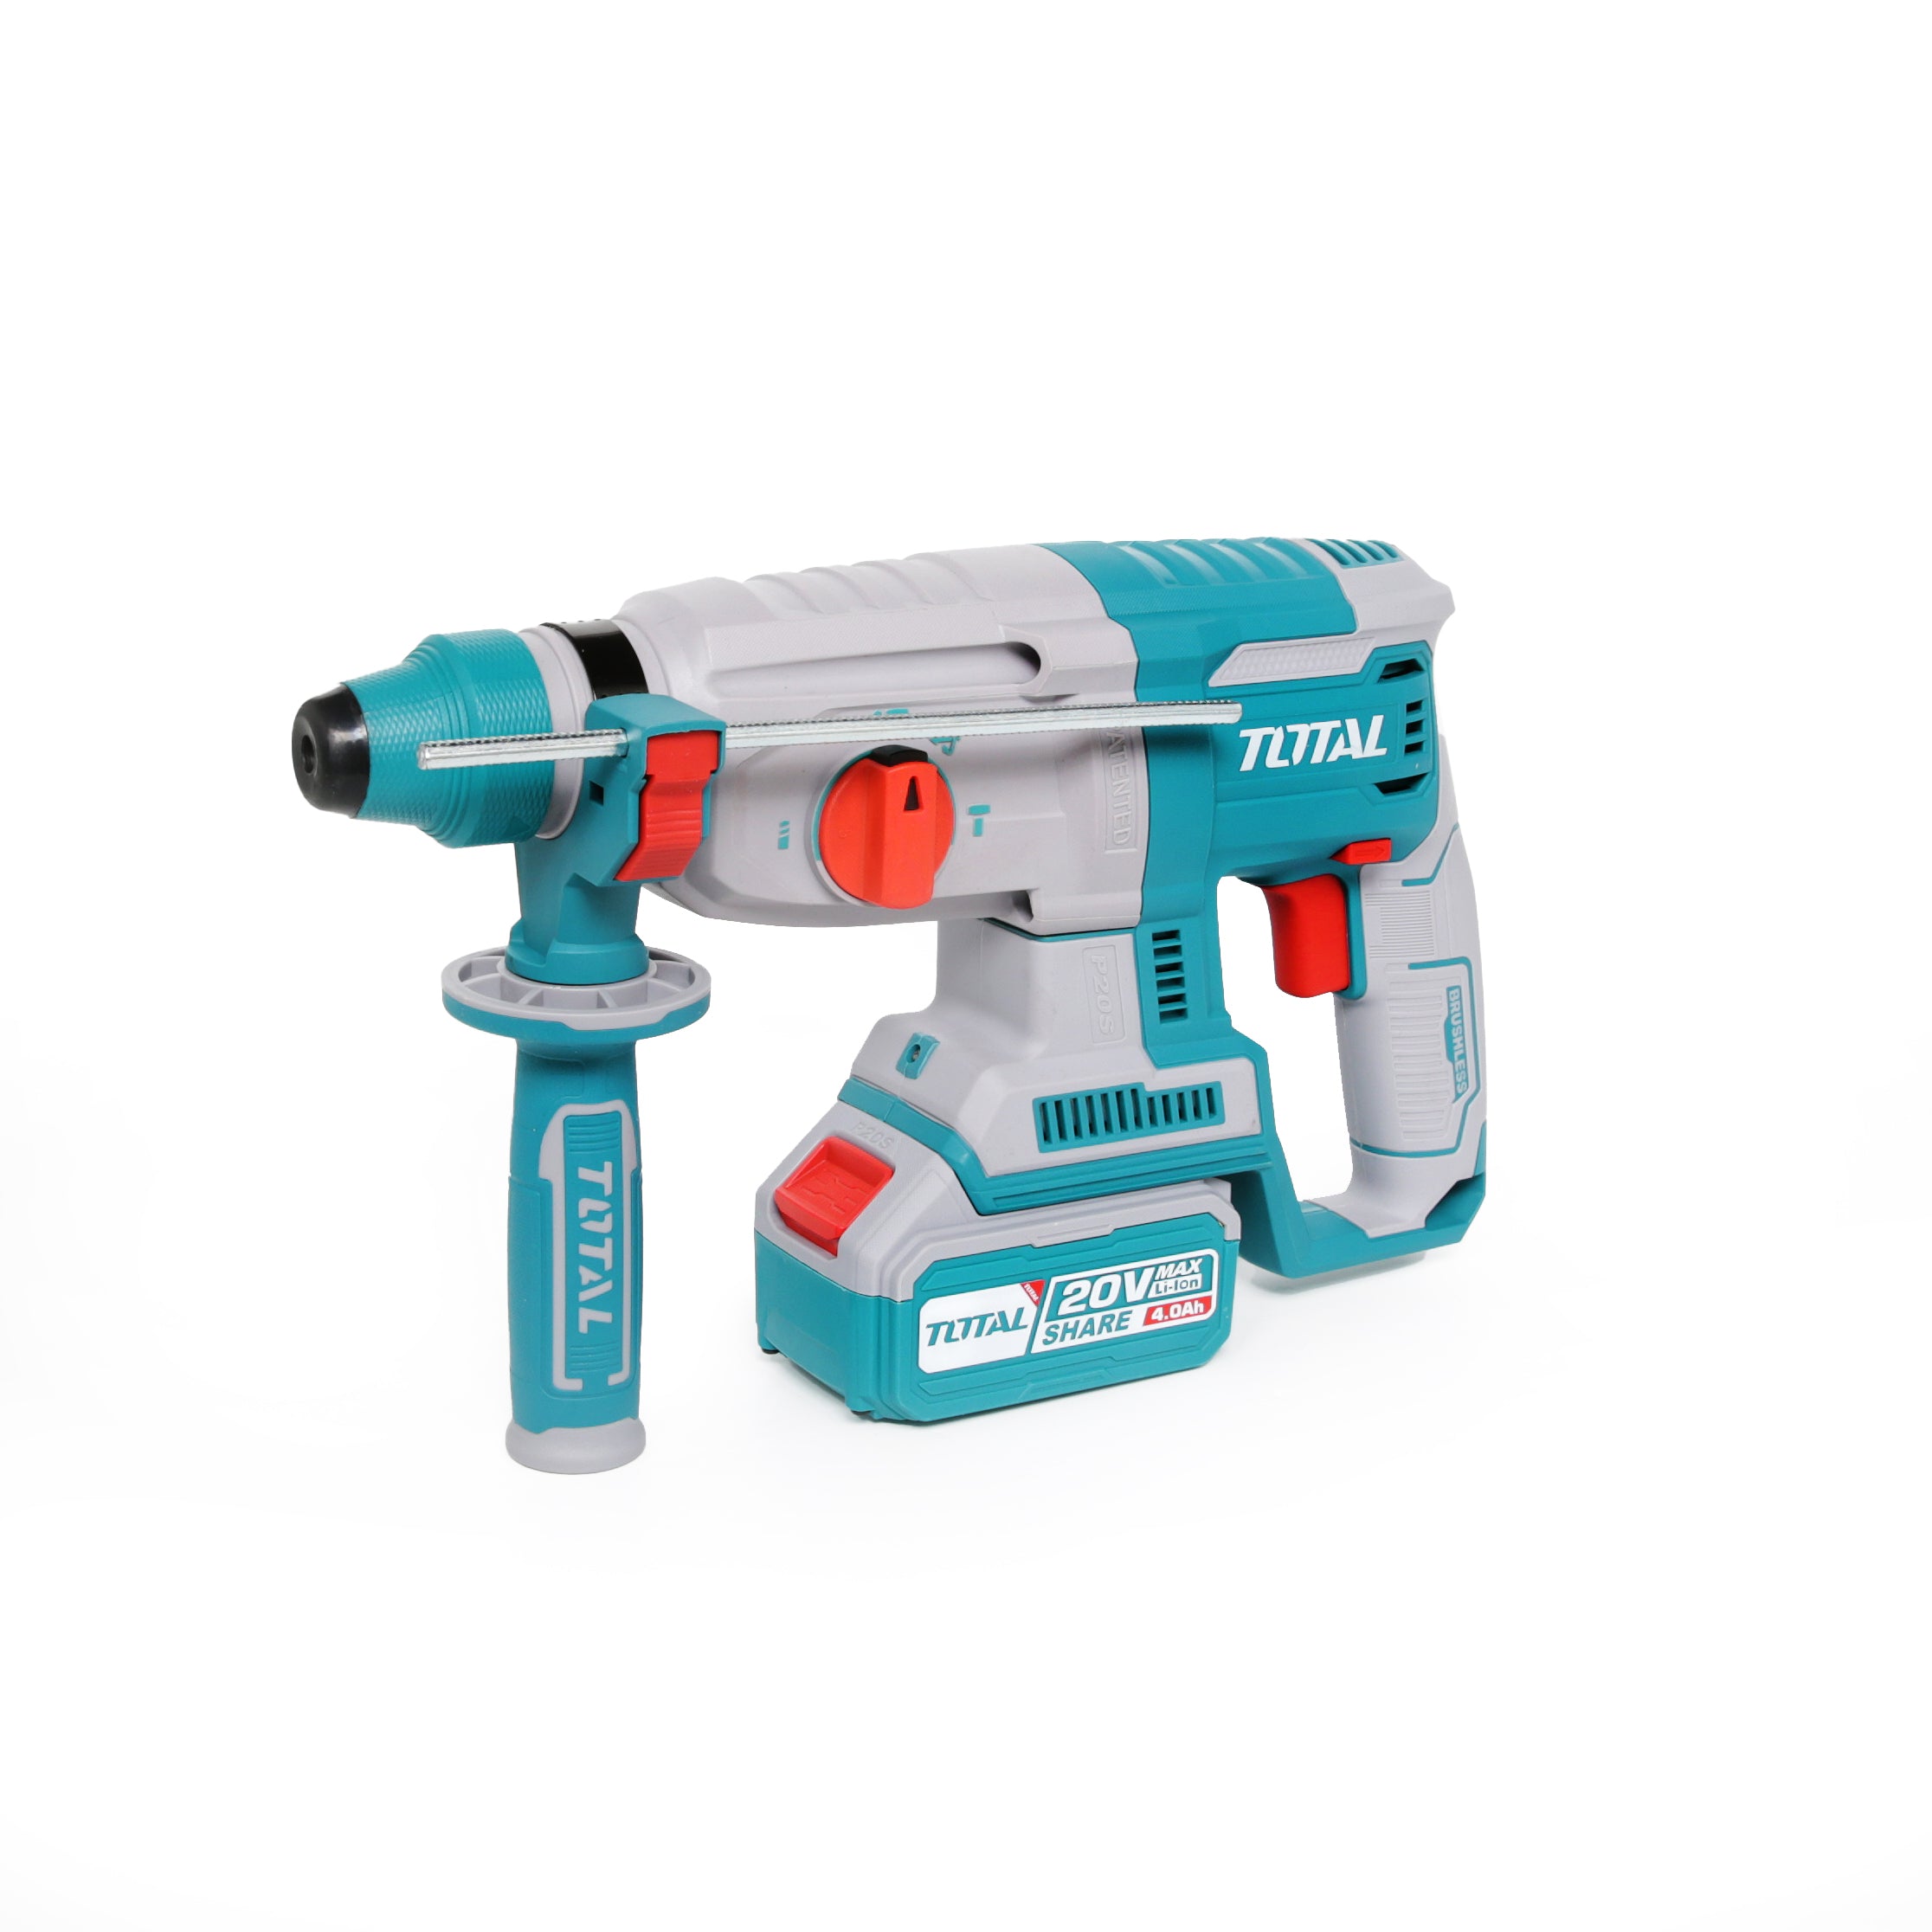 Total Li-Ion 20V Rotary Hammer (with 2 x Batteries & Charger) - TRHLI202287